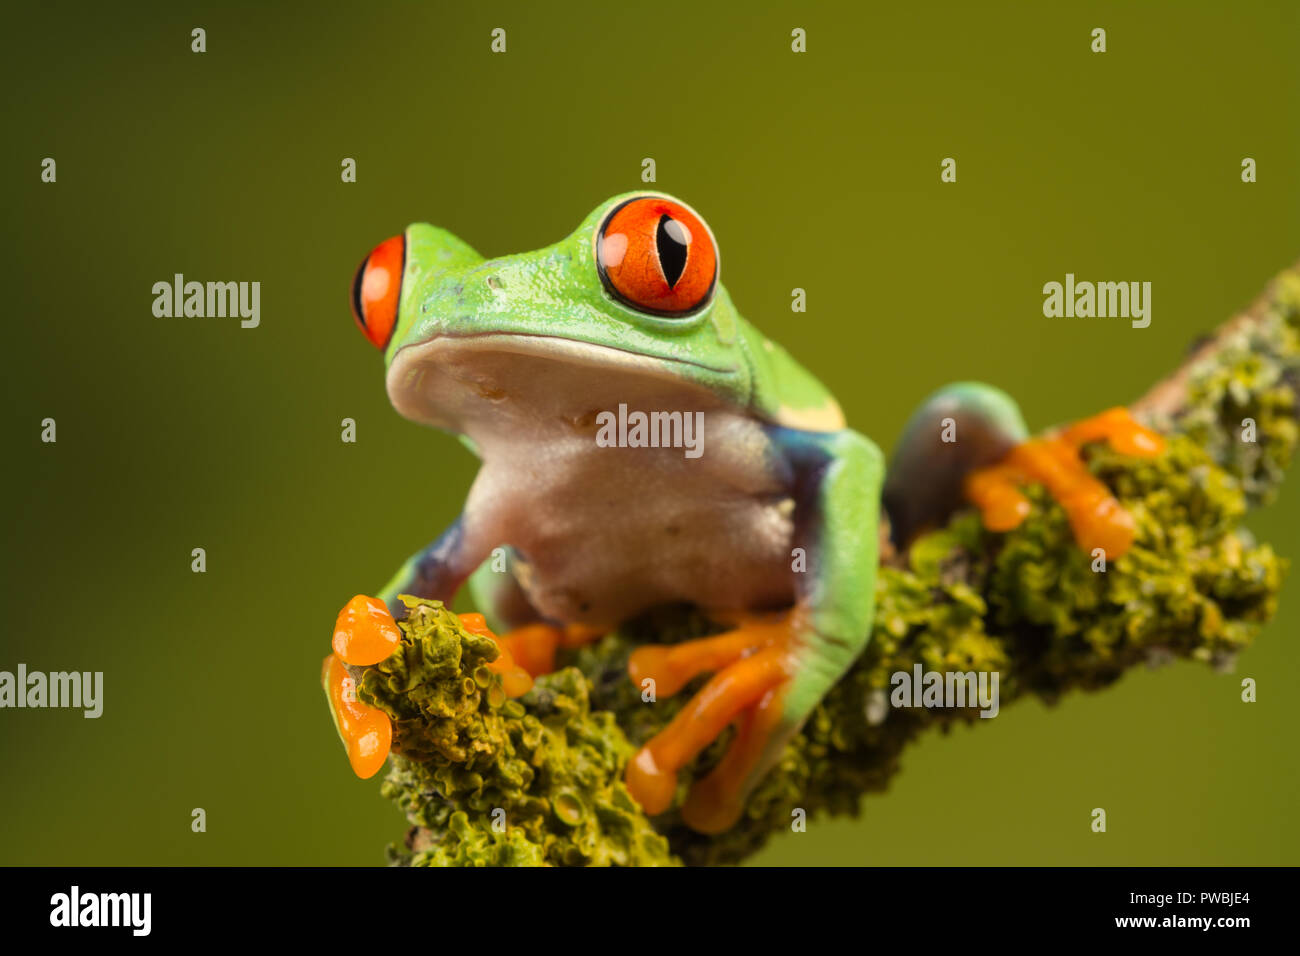 Close-up of red-eyed tree frog (Agalychnis callidryas), a colourful amphibian species, on a twig Stock Photo